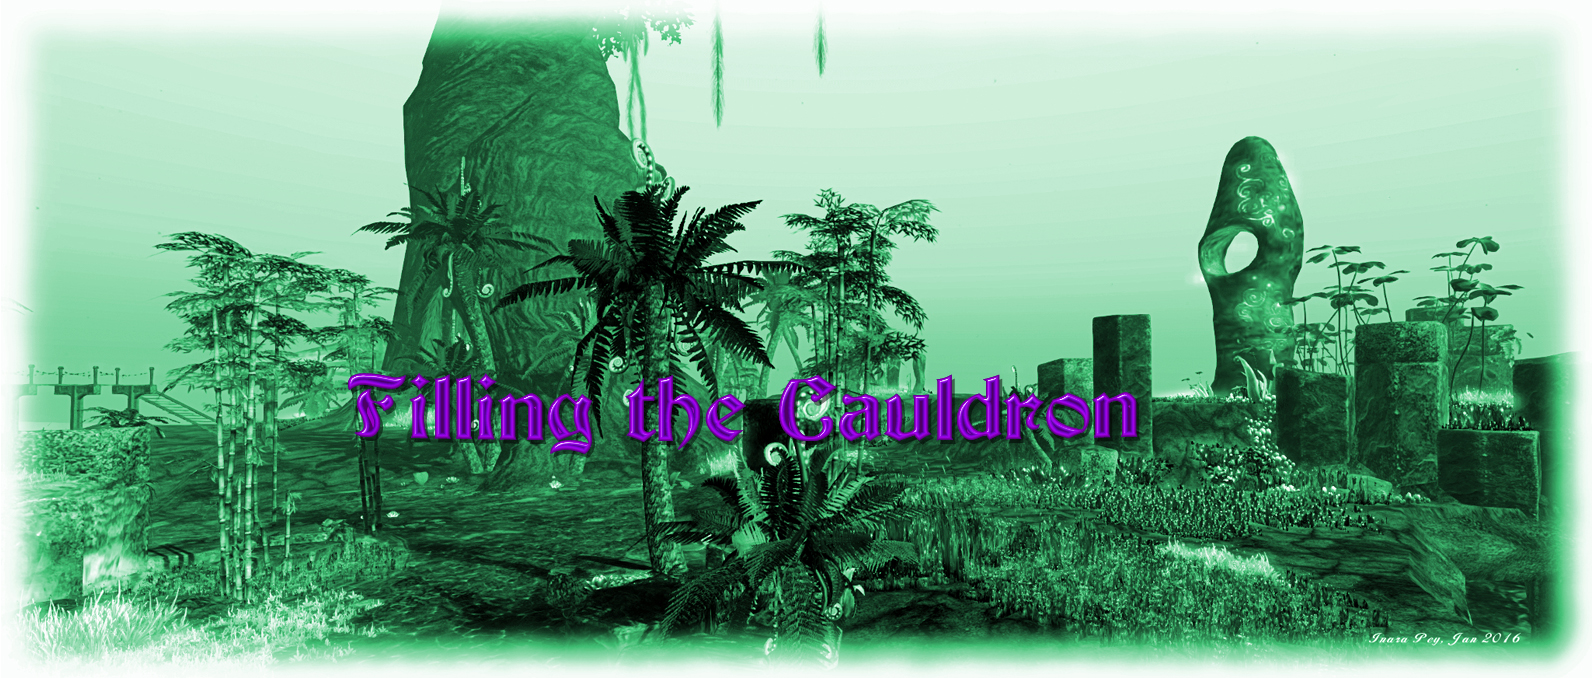 Filling the Cauldron - click to visit the site